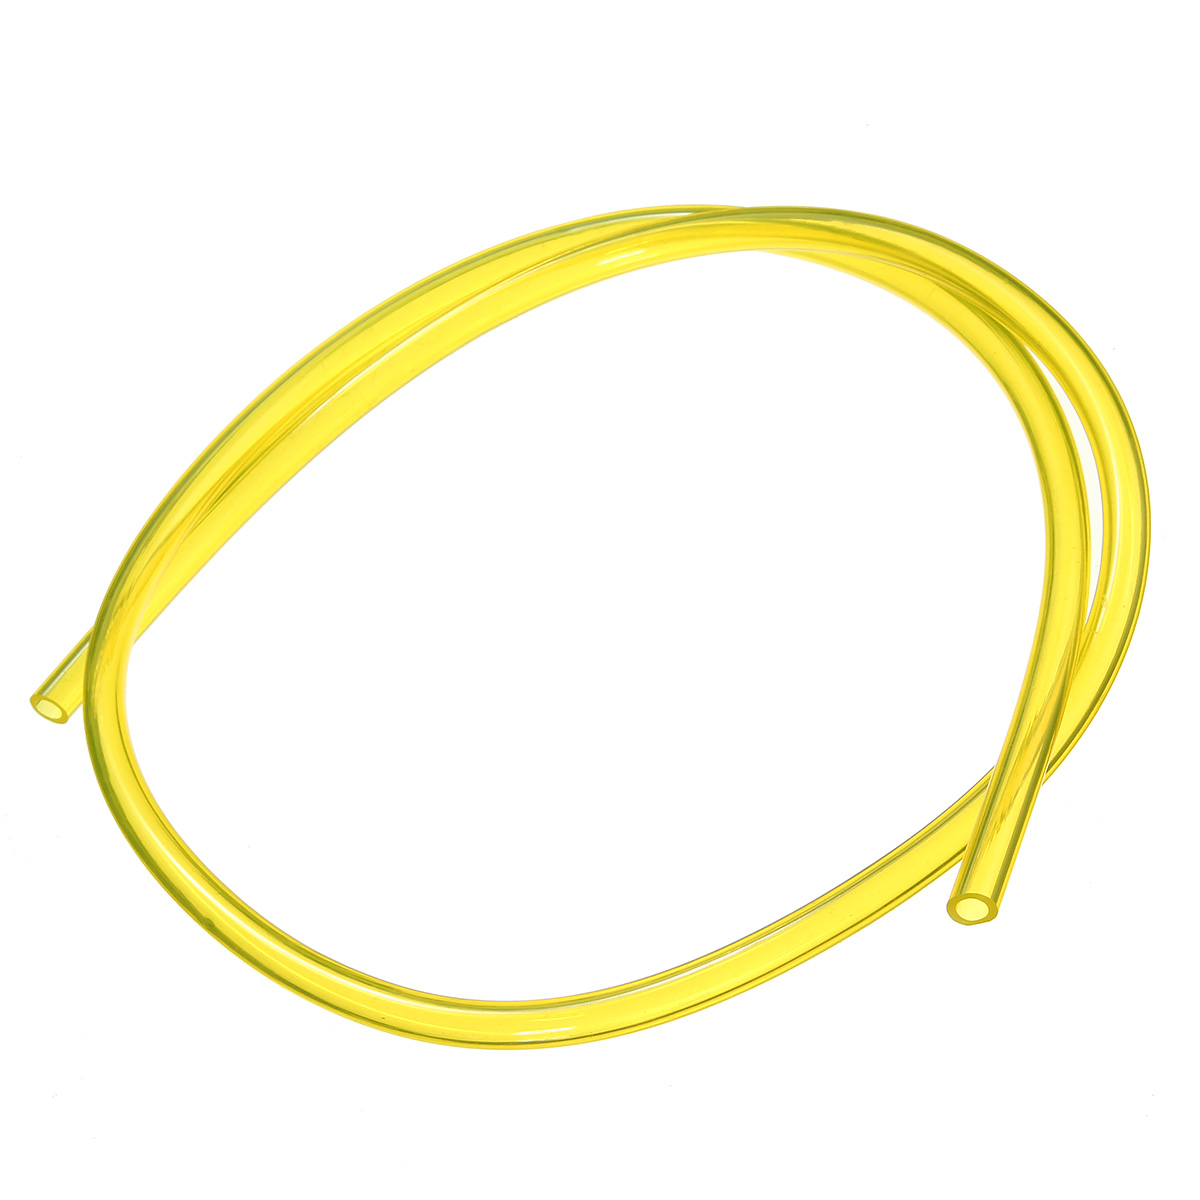 3x5mm-Fuel-Hose-Fuel-Filter-Hose-For-Mower-Motorcycle-Scooter-Brushcutter-1340145-3